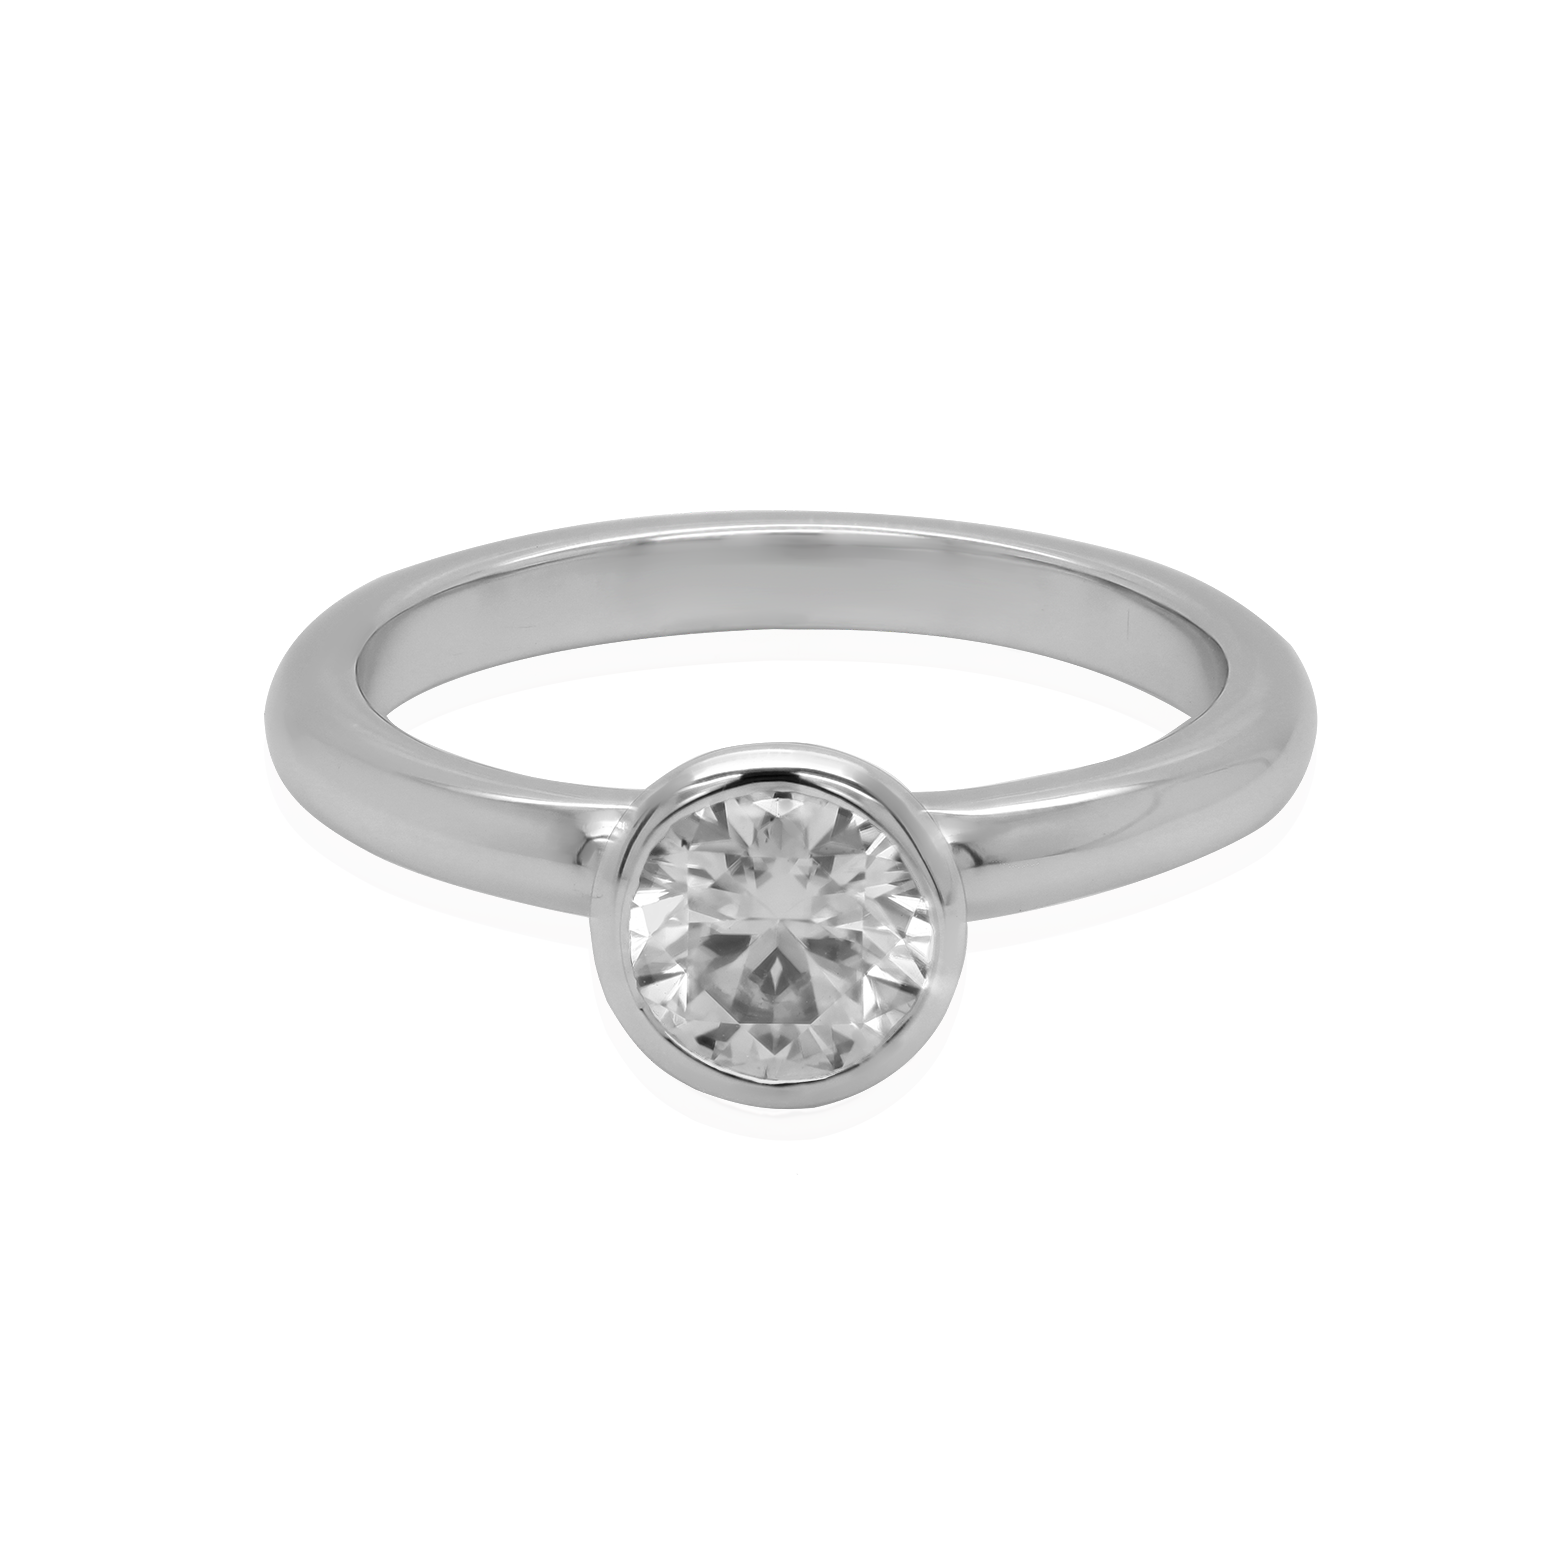 Close-up of a classic solitaire ring. The band is made of 18K white gold and features a single, sparkling moissanite gemstone in the center.